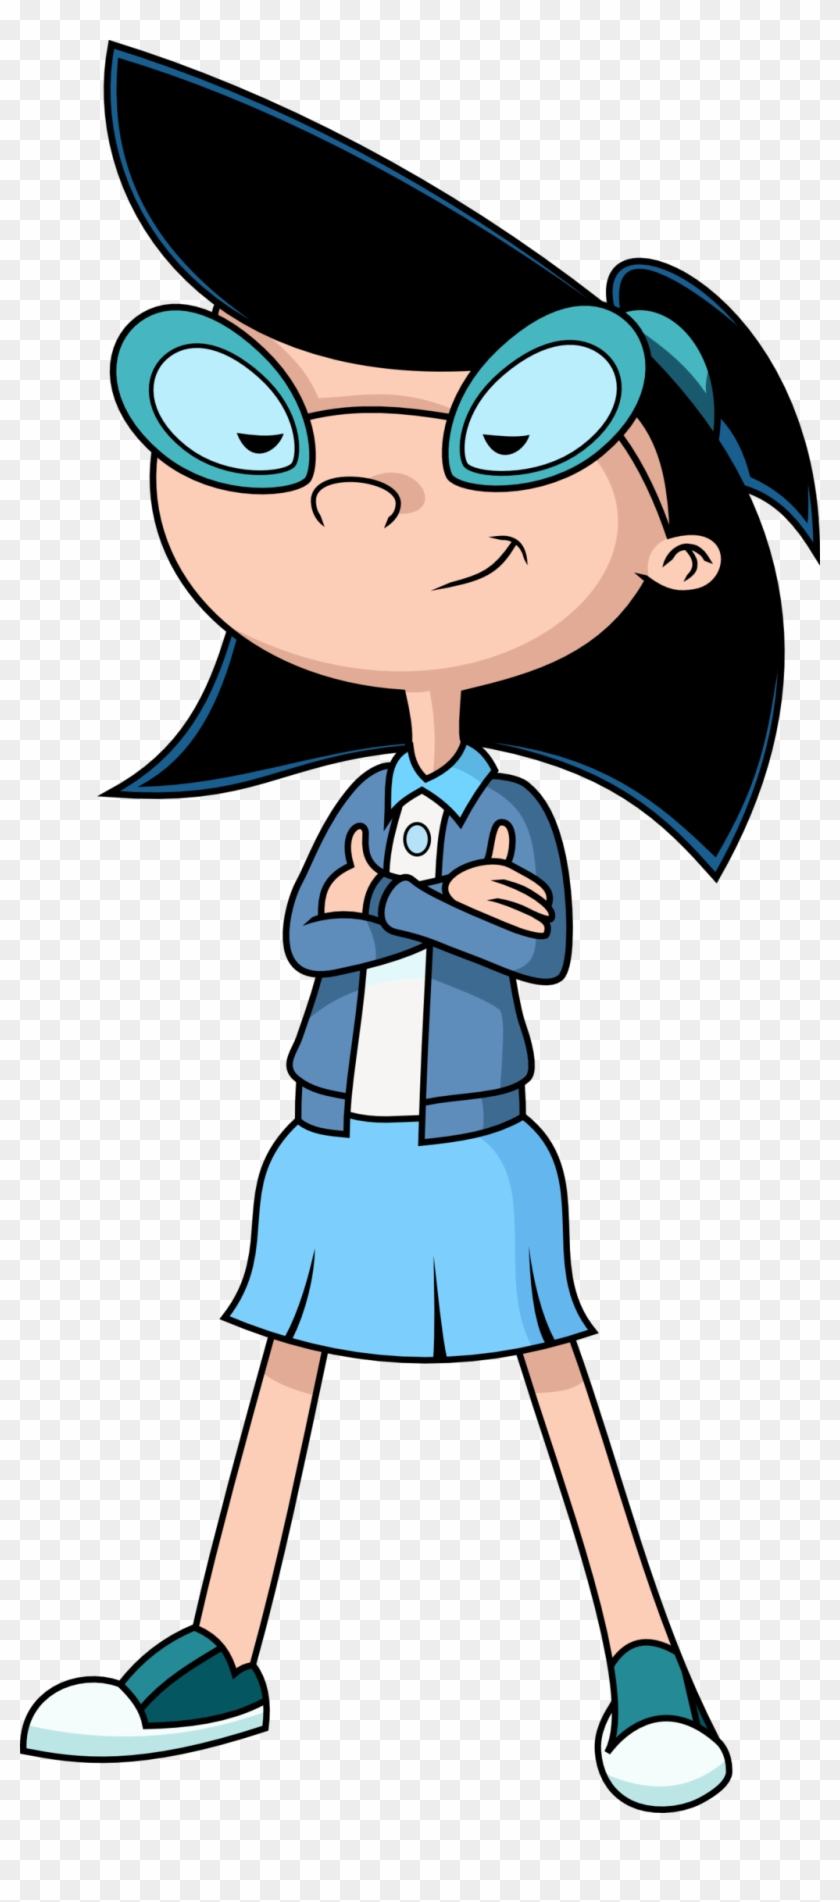 I'm Wondering If You Could Draw Rhonda And Phoebe Together - Hey Arnold The Jungle Movie Phoebe #601197